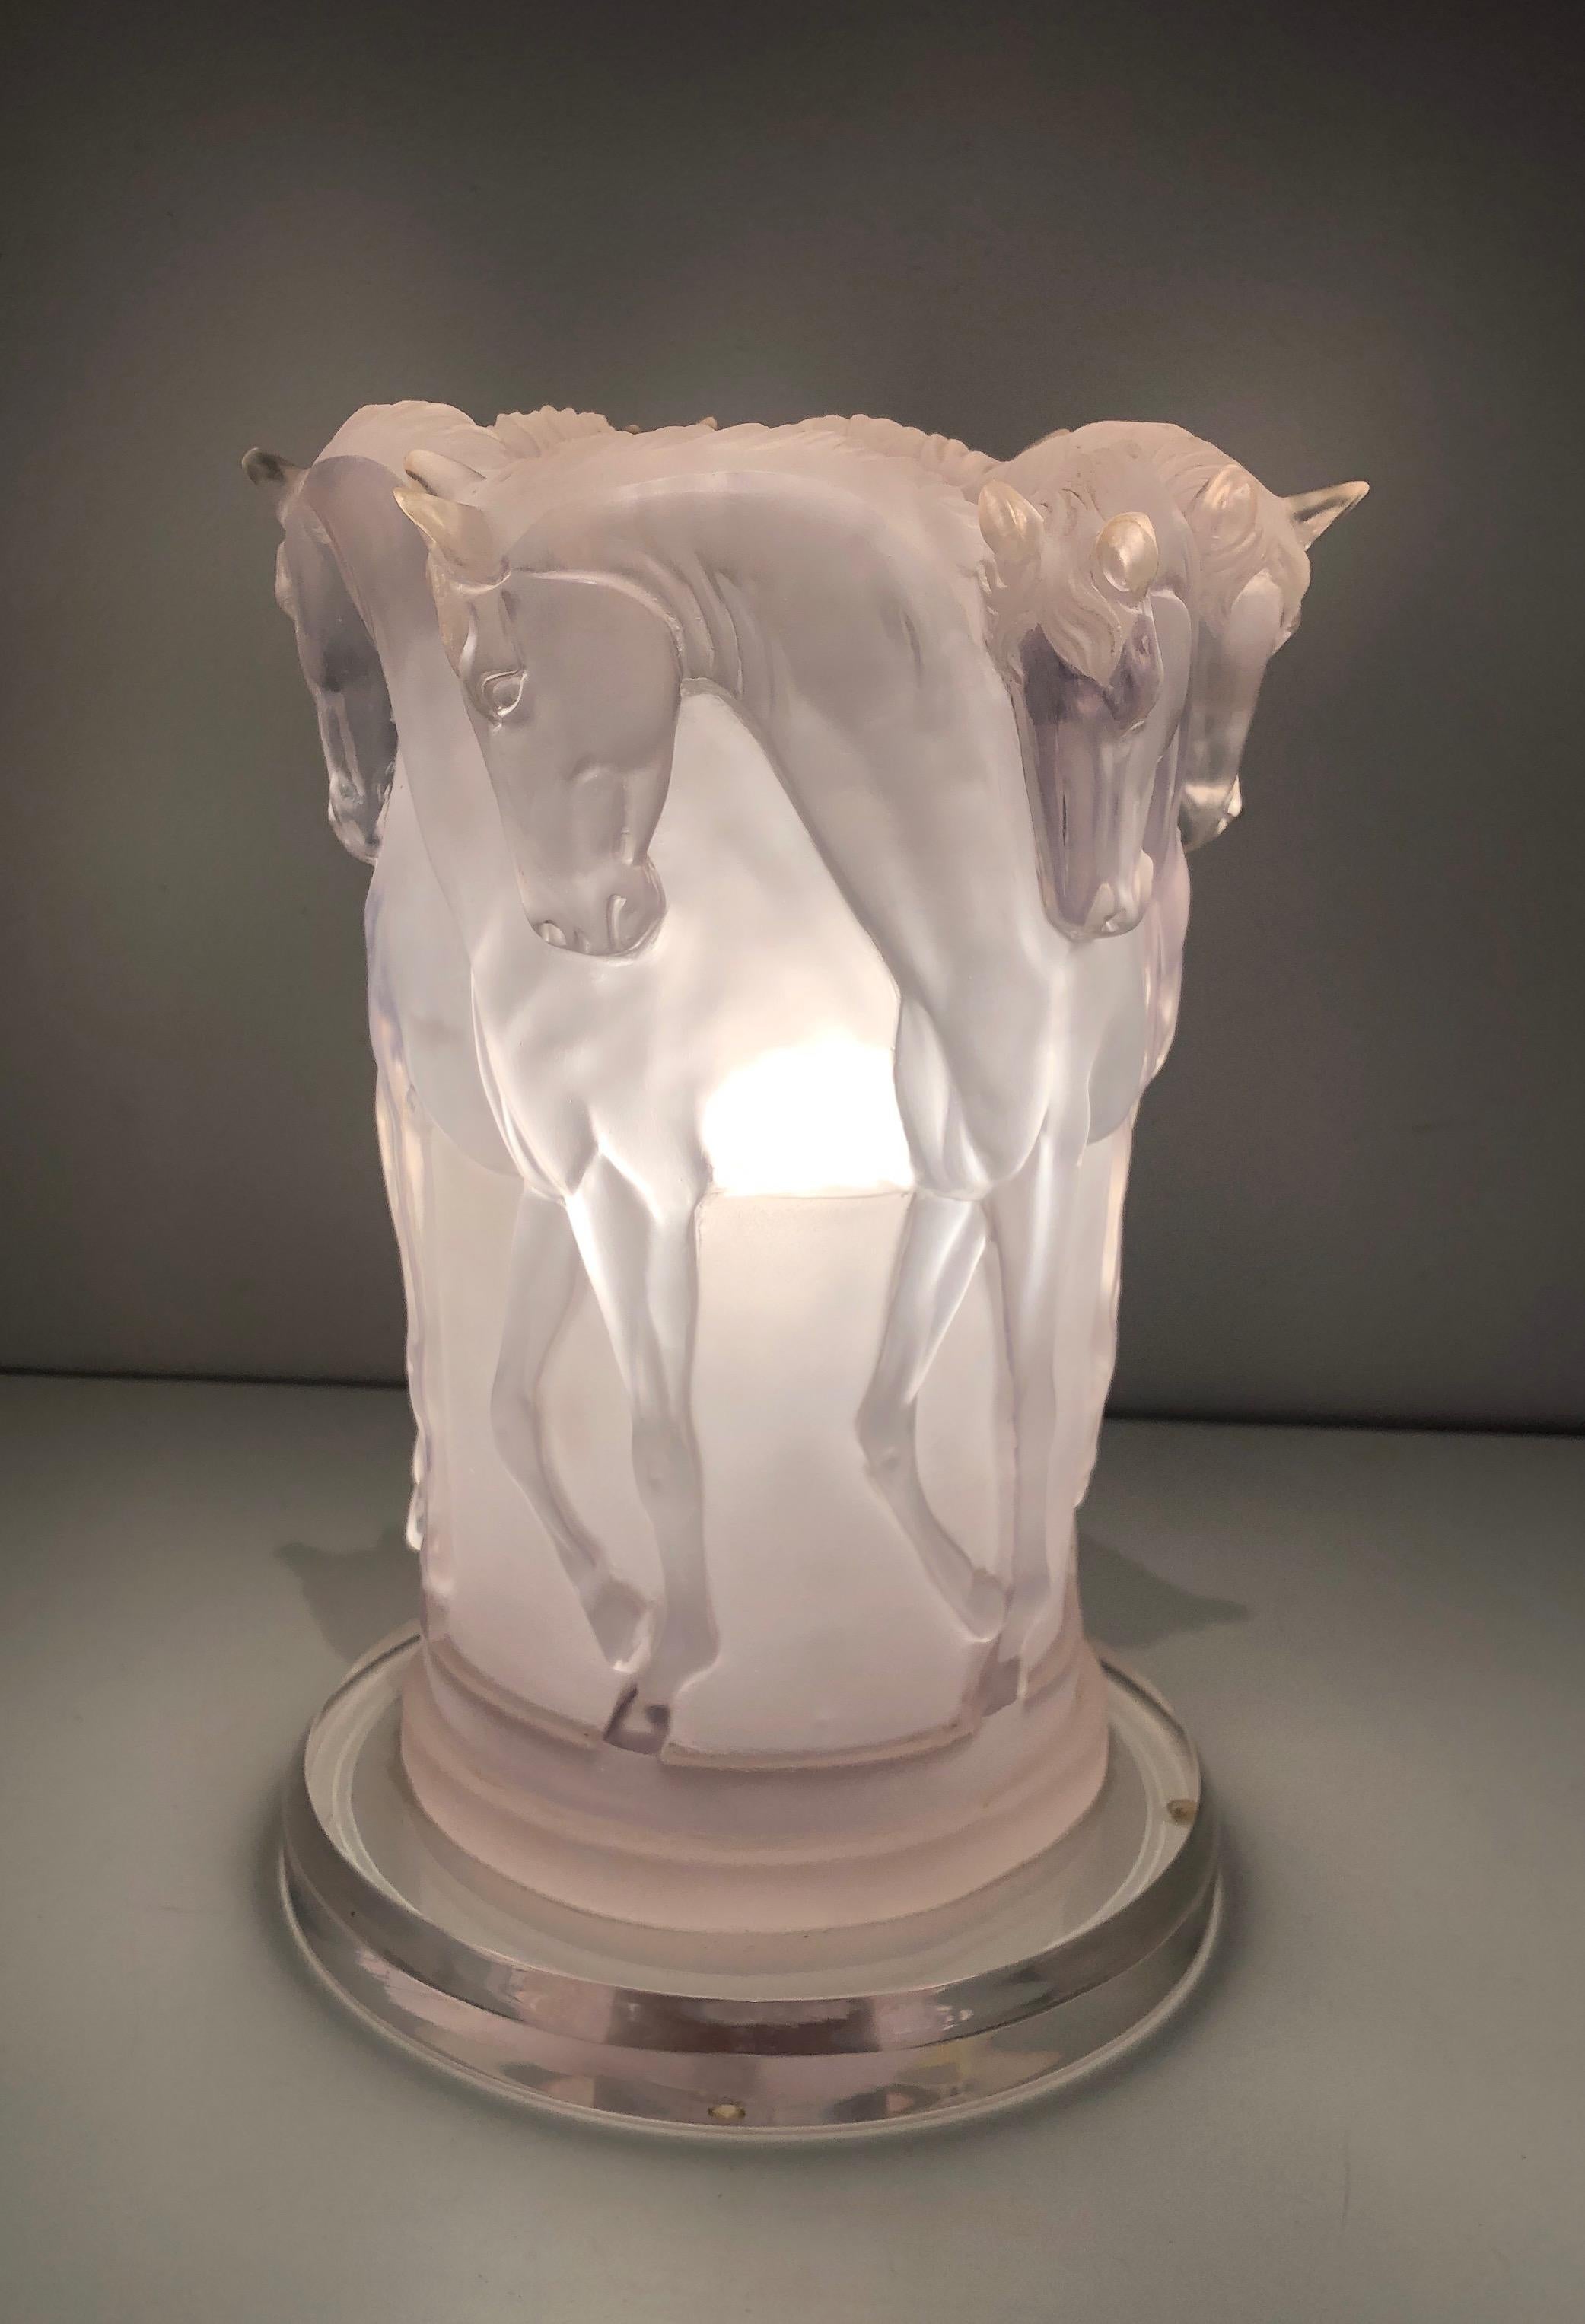 This very nice table lamp showing horses is all made of lucite. This is a very interesting French work in the style of Maison Lalique. Circa 1970.